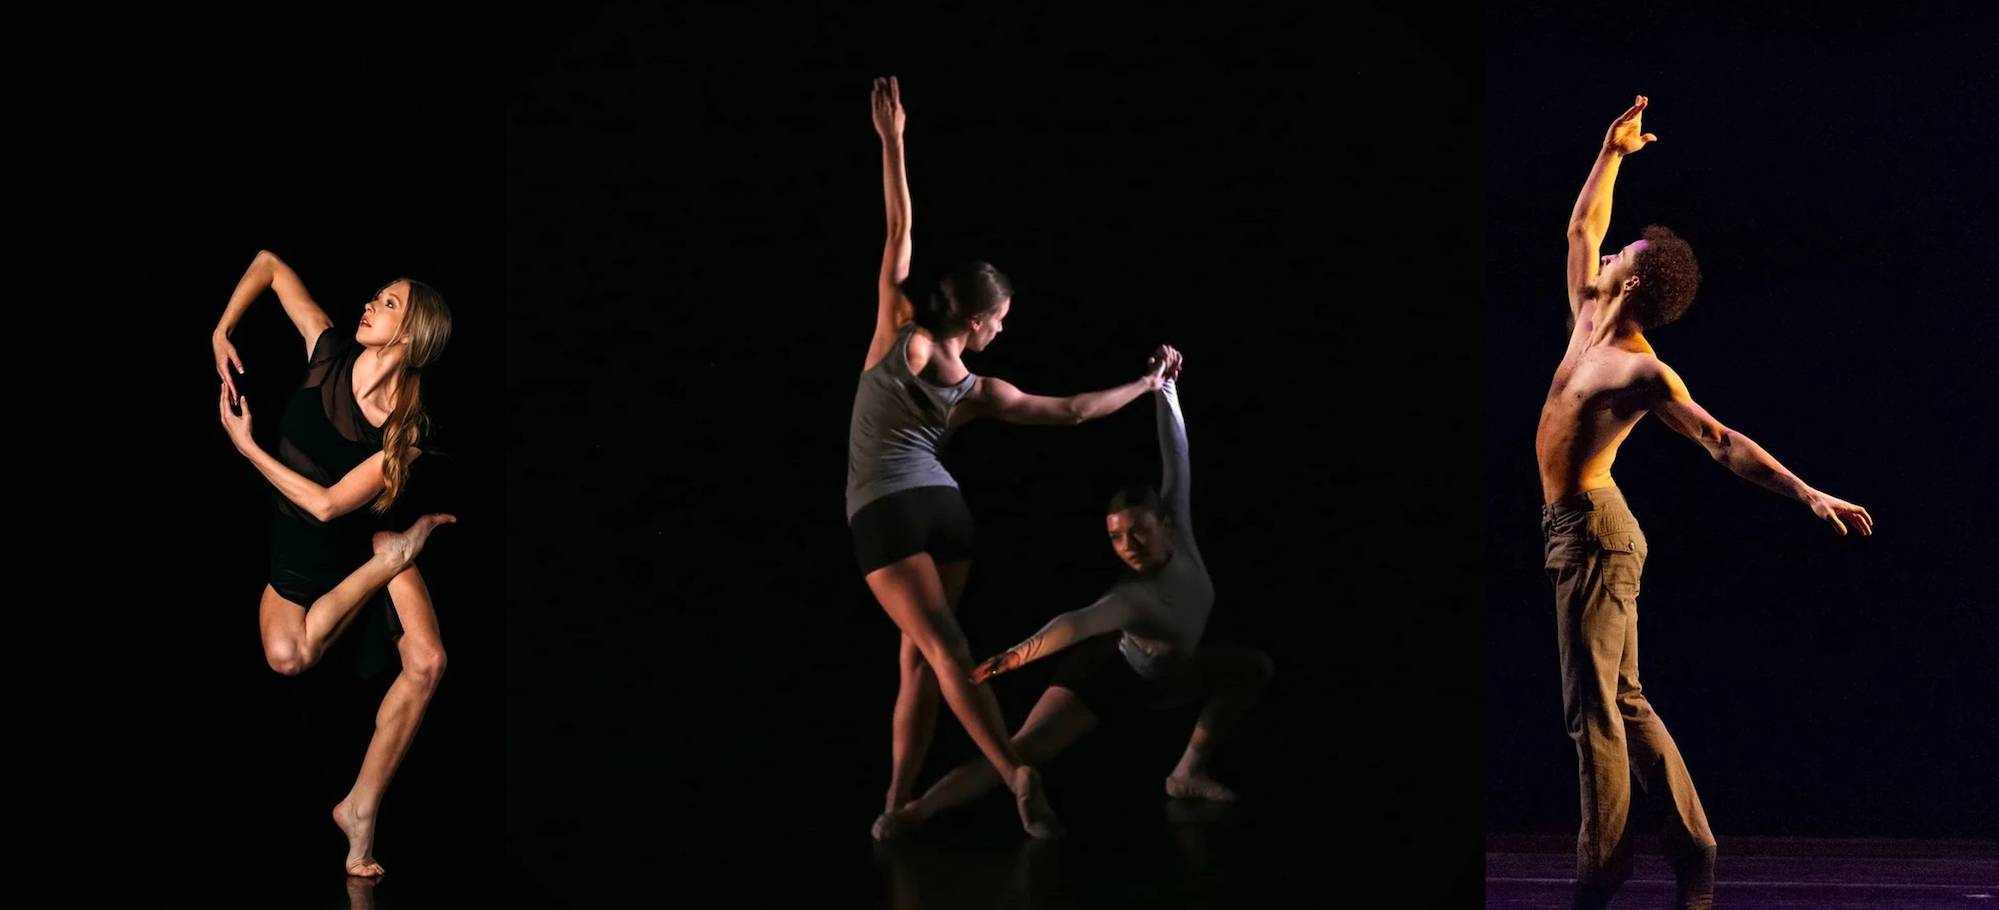 Three photo collage featuring individual modern dancers against a black background